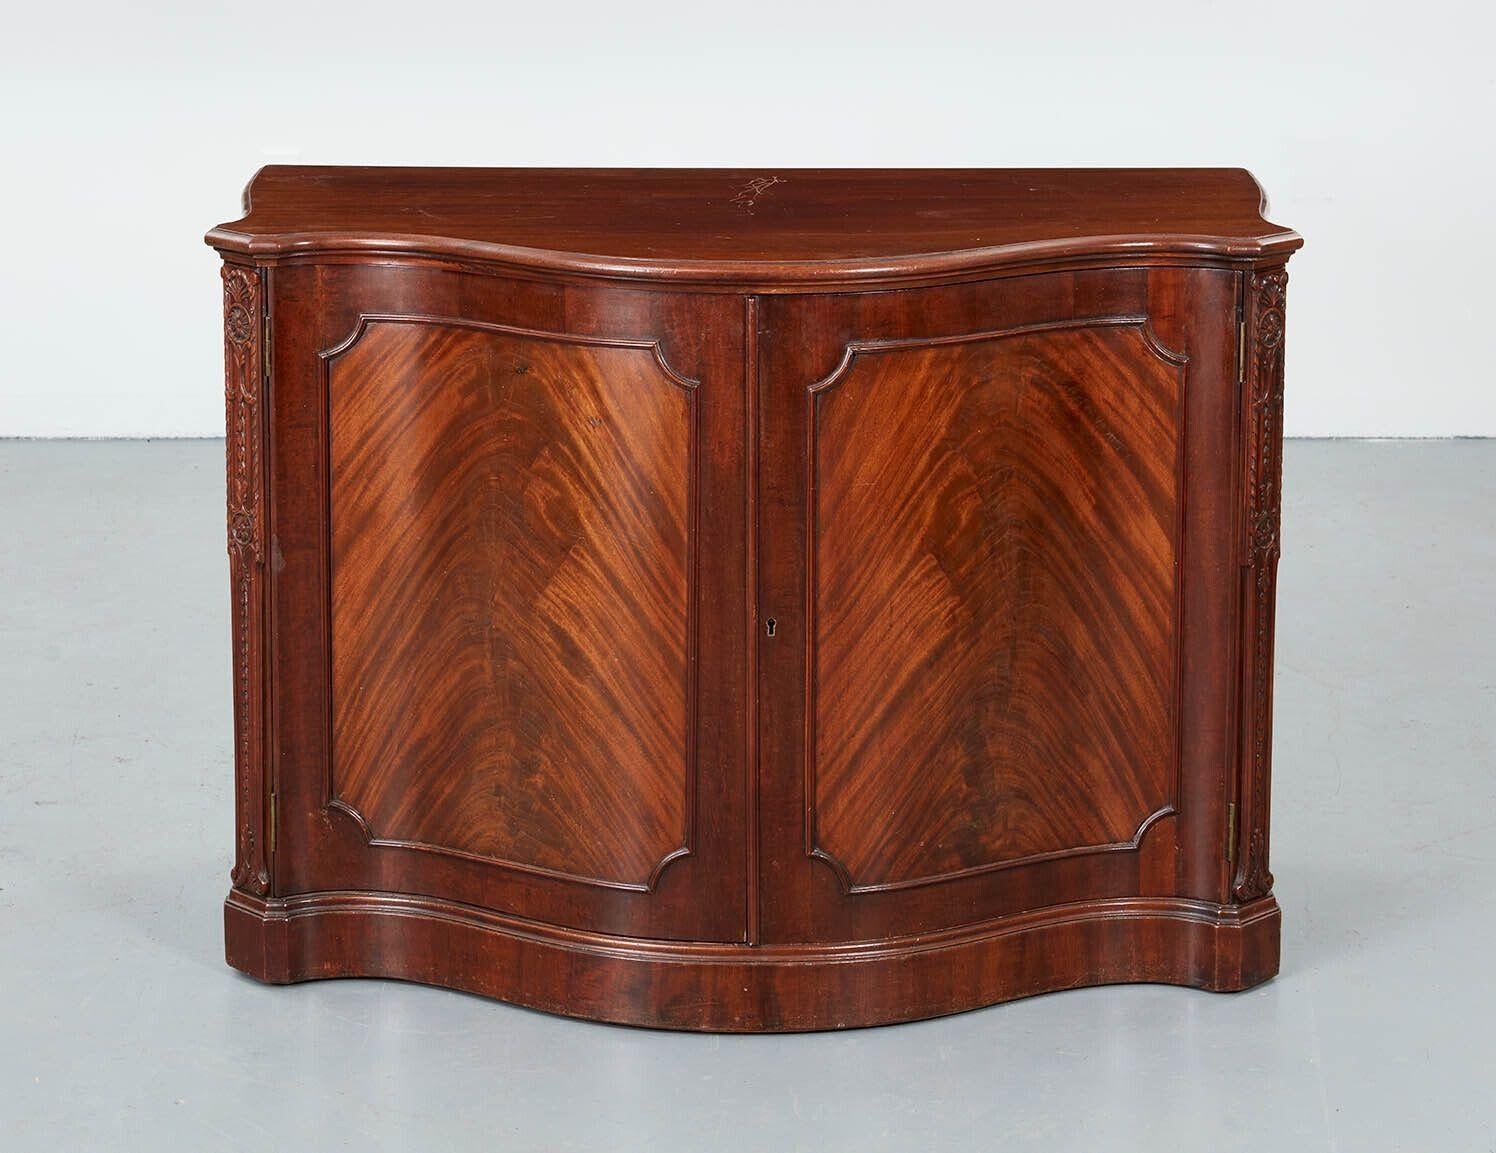 Very fine George III mahogany serpentine cabinet, the shaped top with molded edge, the two doors in vivid crotch grain with hard round molded surround, the canted corners having honeysuckle, bellflower and paterae carving and standing on molded